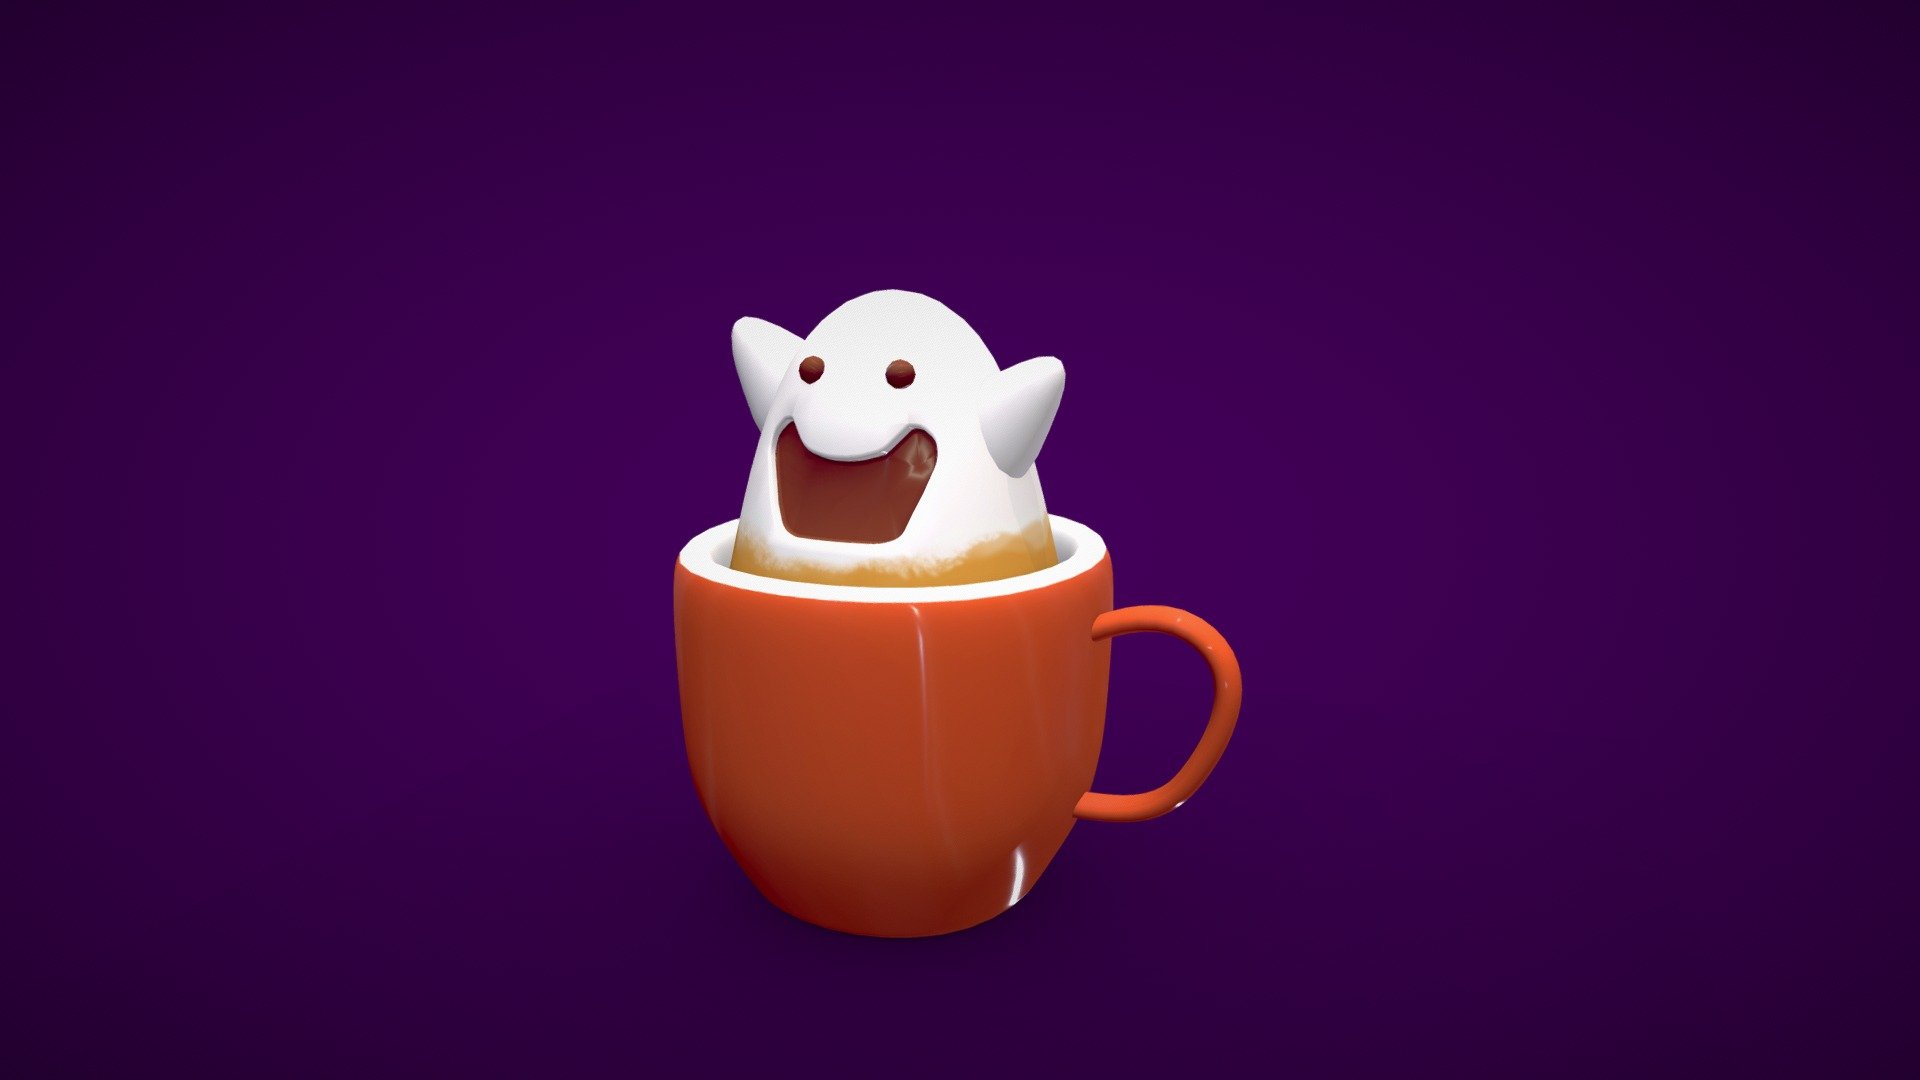 my first model.
concept by Anna Kajda - halloween cup - 3D model by raggy0 3d model